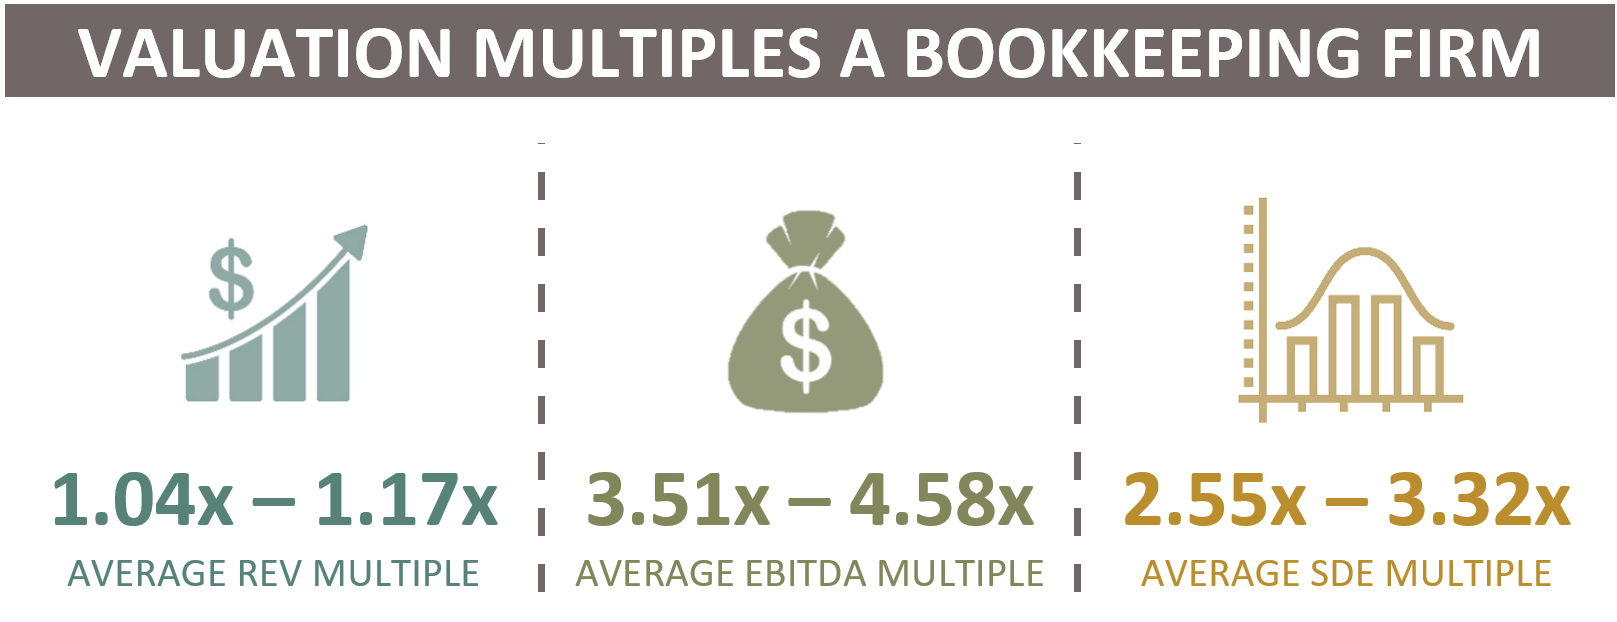 Valuation Multiples For A Bookkeeping Firm